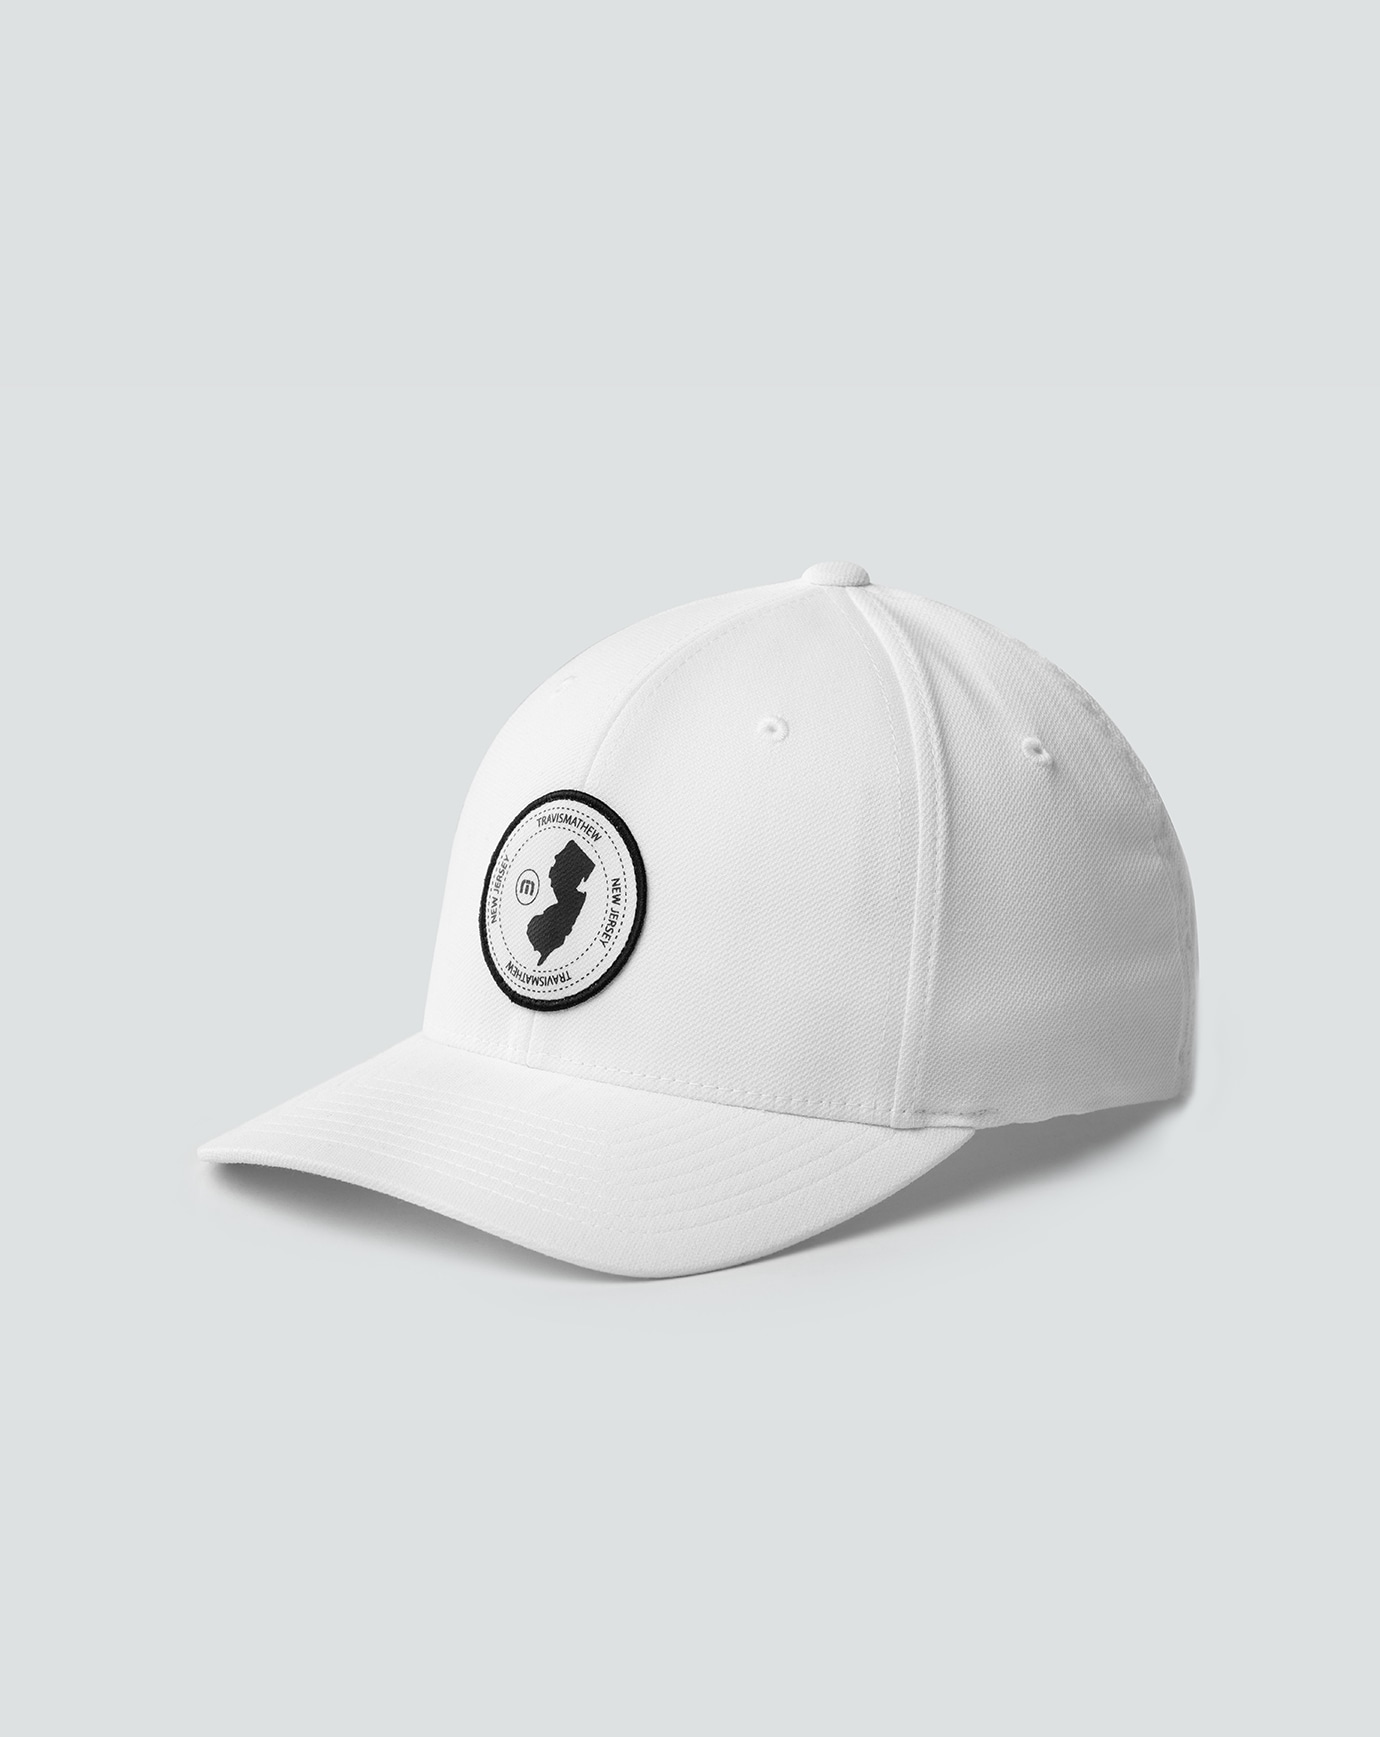 EAST COAST TIME FITTED HAT Image Thumbnail 2